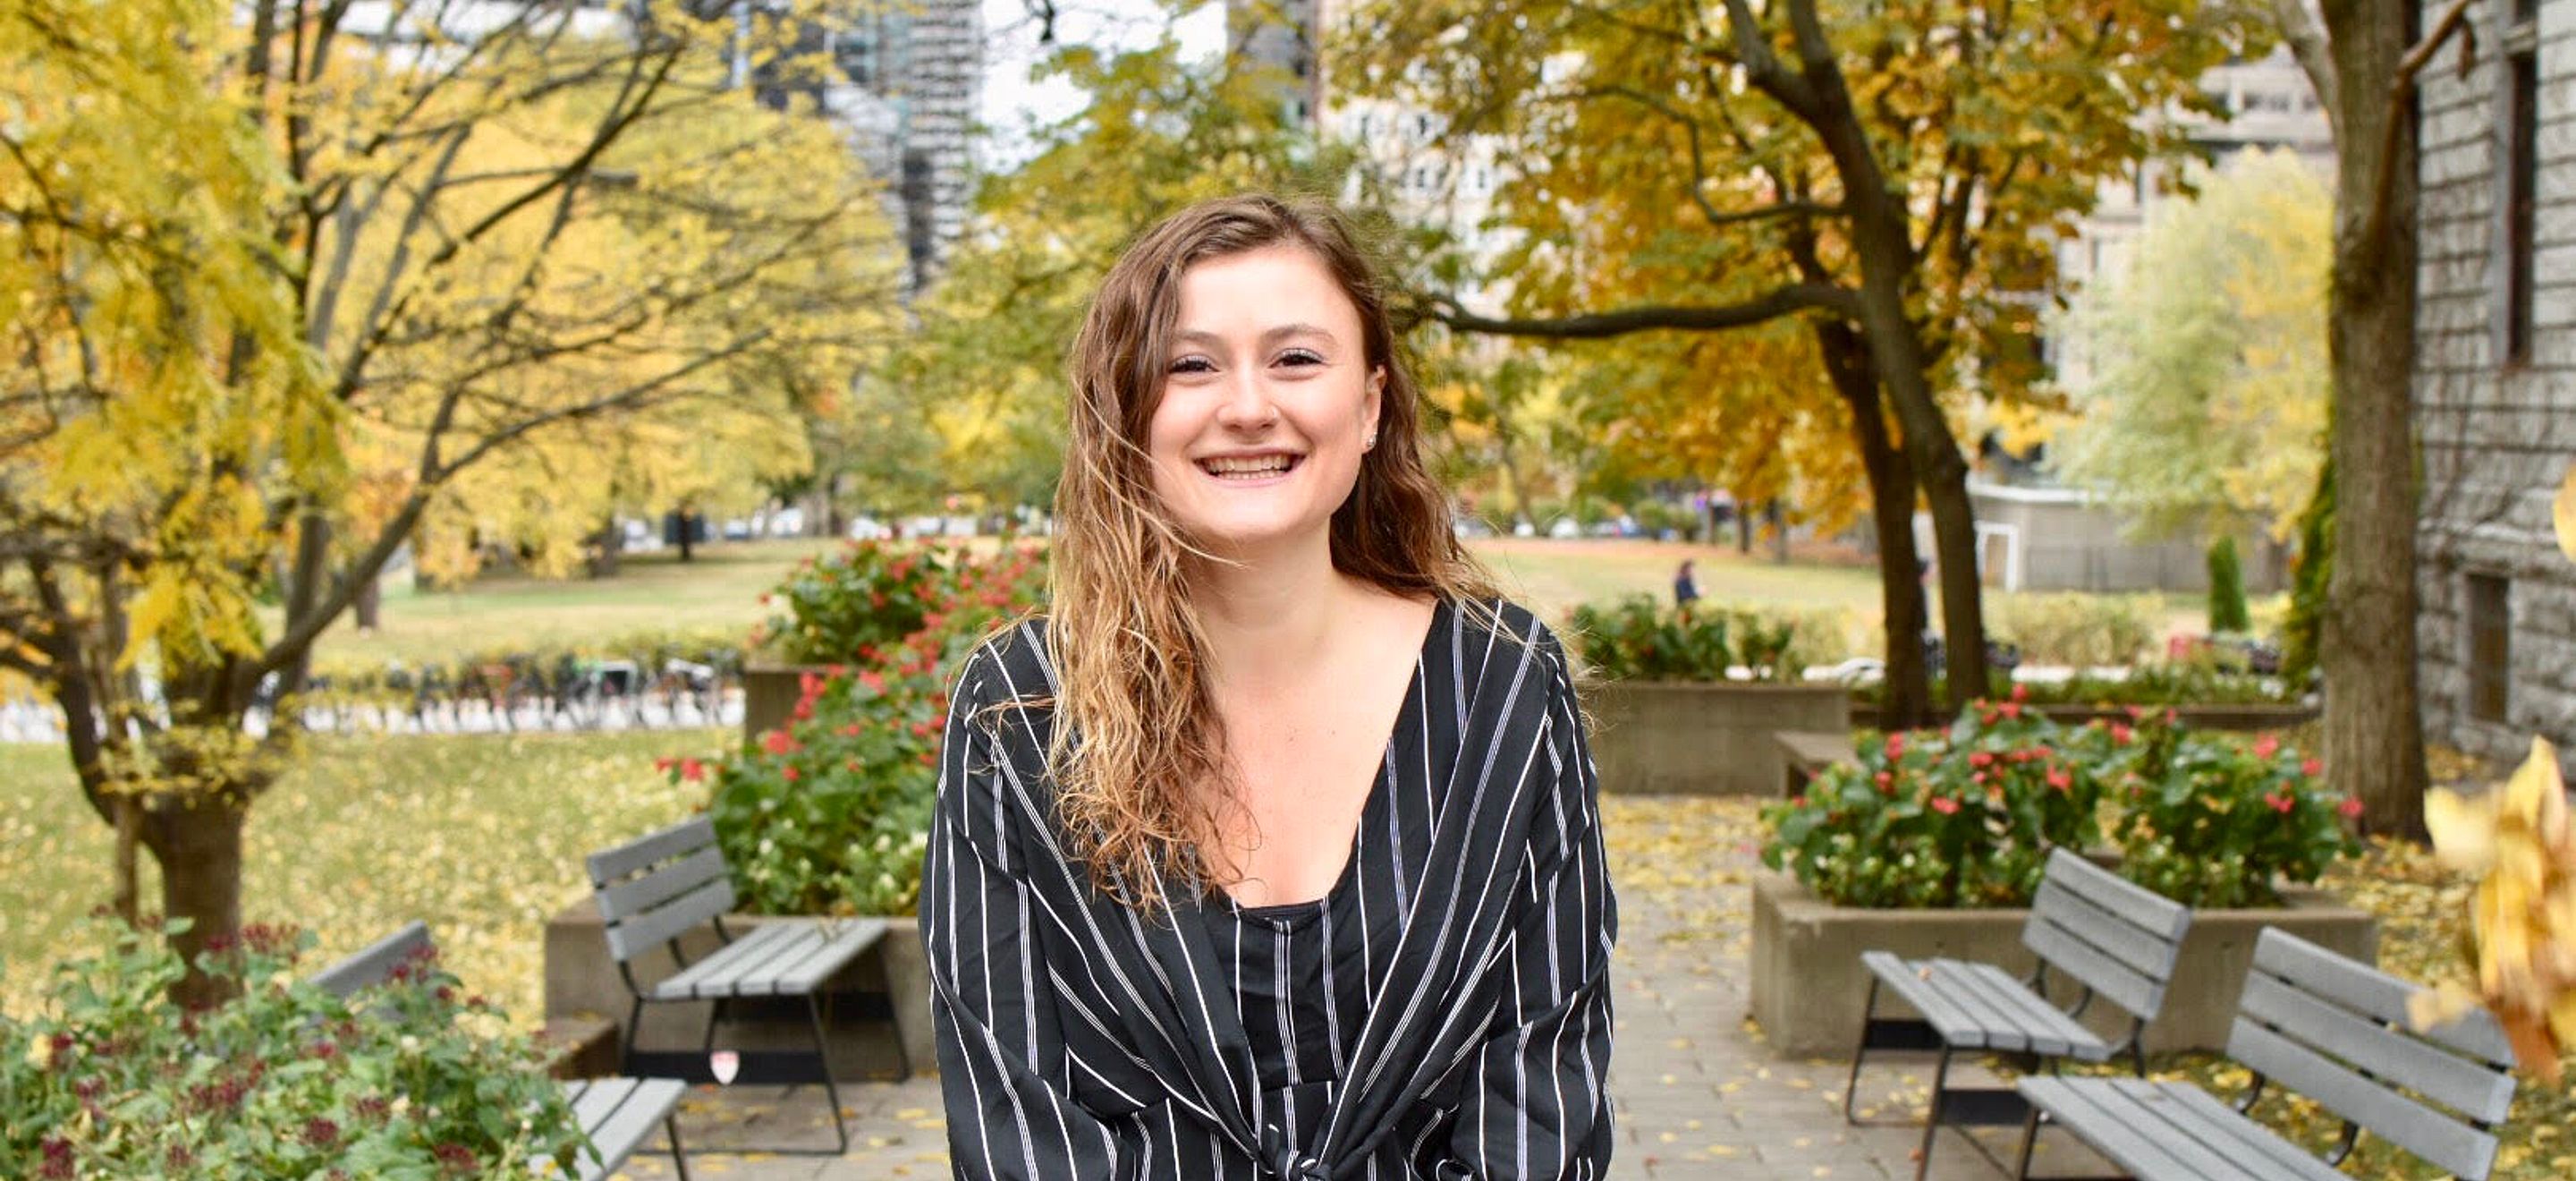 Naomi Santesteban, a student at a Candian IRAP Law School Chapter, smiles into the camera. She has wavy blondish brown hair and wears a black and white striped outfit.In the background, trees with yellow leaves, wooden benches, and stone buildings are visible.